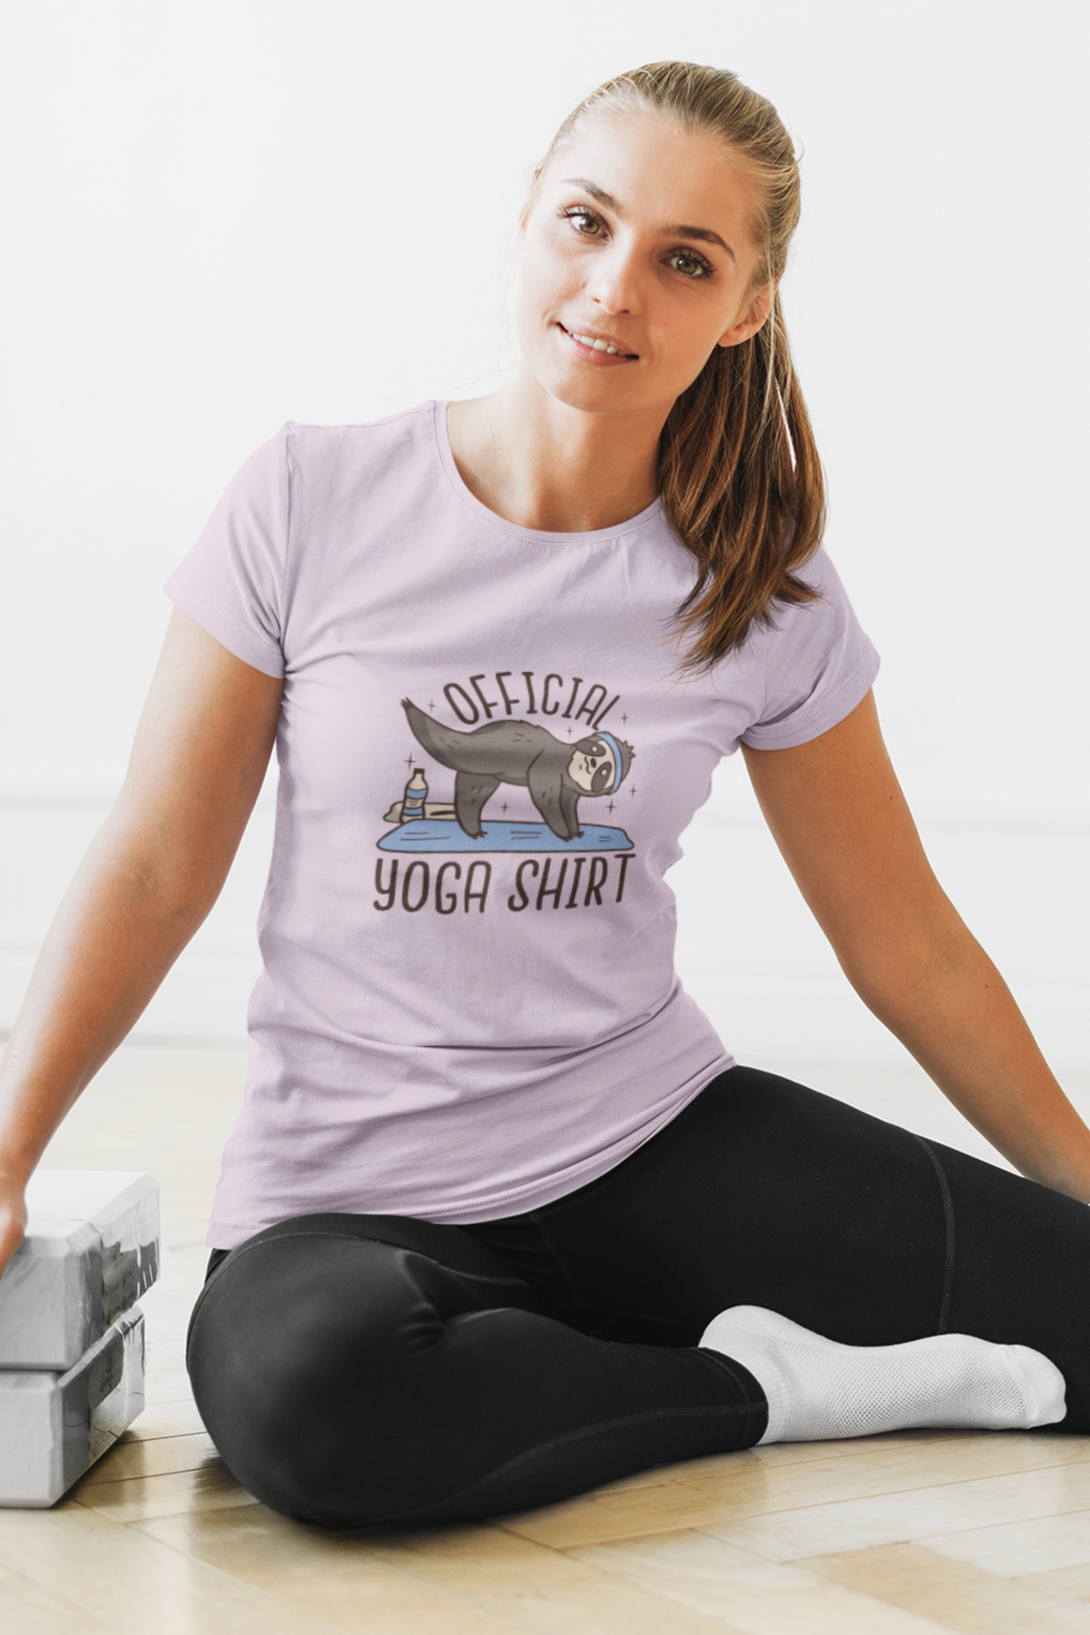 Official Yoga Sloth Printed T-Shirt For Women - WowWaves - 2